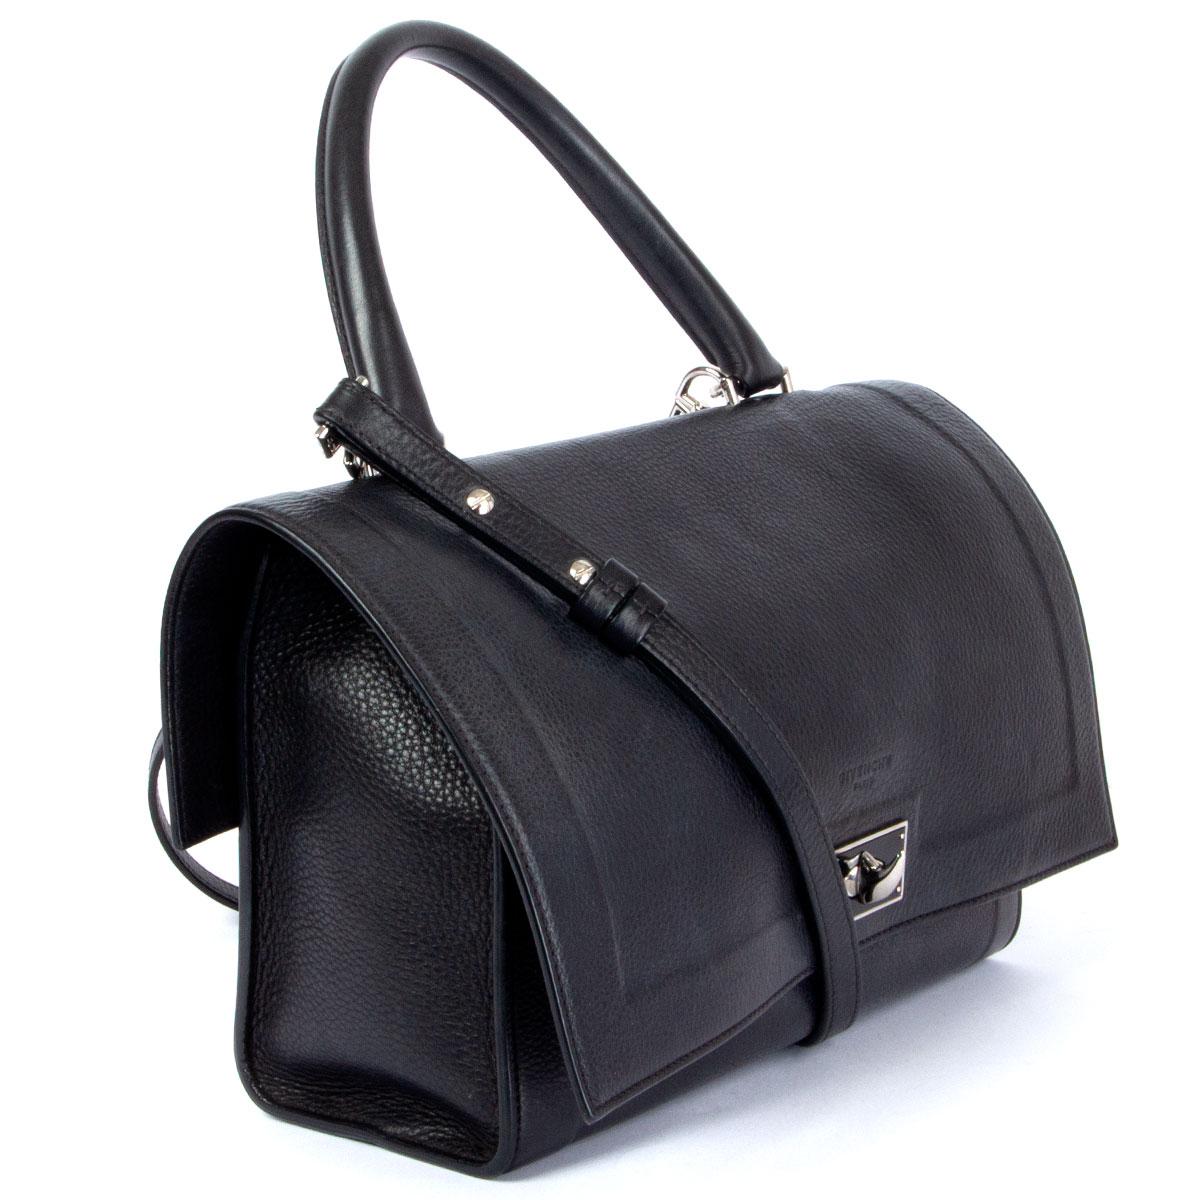 100% authentic Givenchy Shark Mini shoulder bag in black grained leather. Opens with a flap and turn-lock and is lined in black suede with one zipper  and open pocket against the back. Comes with an adjustable and detachable shoulder strap. Has been